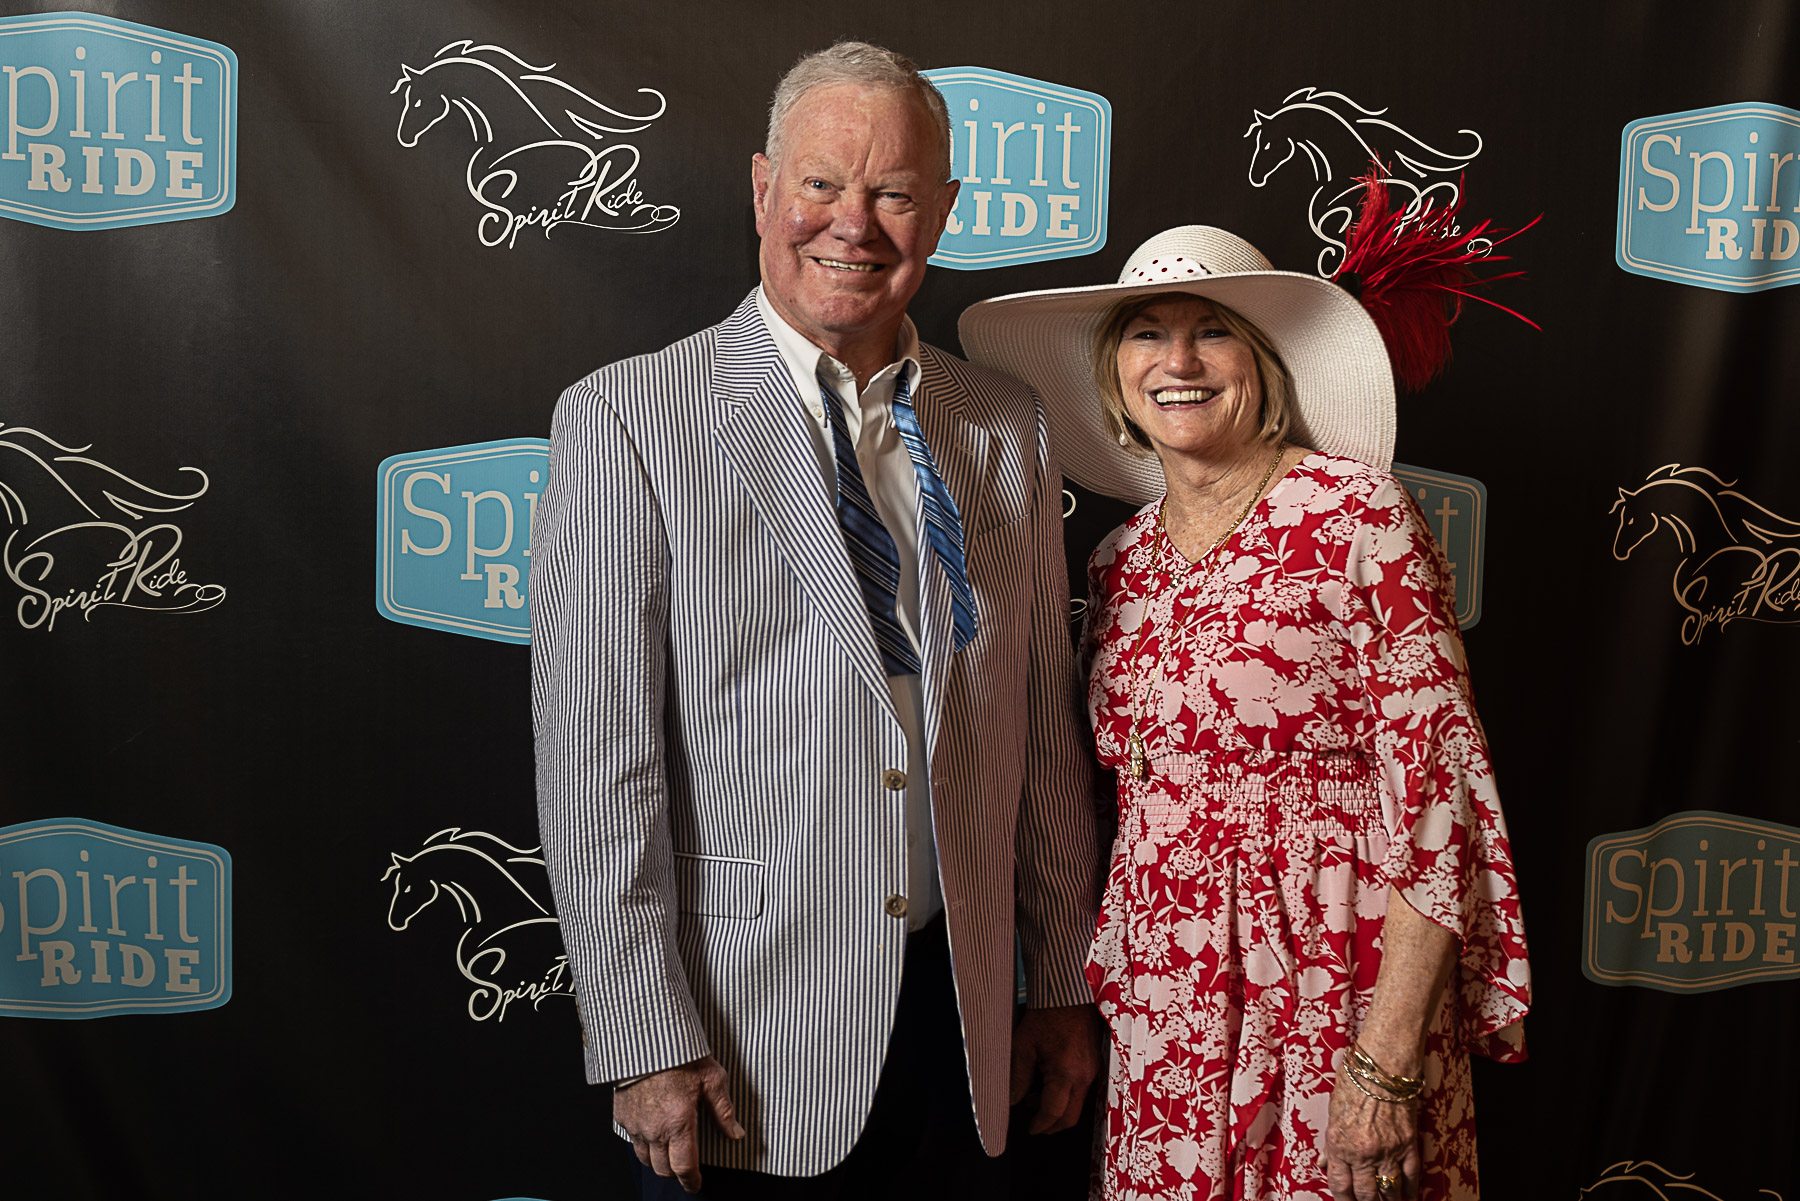 Fundraiser Celebrates 150th Kentucky Derby on Saturday, May 4  Proceeds Benefit Spirit Ride Therapeutic Riding Center